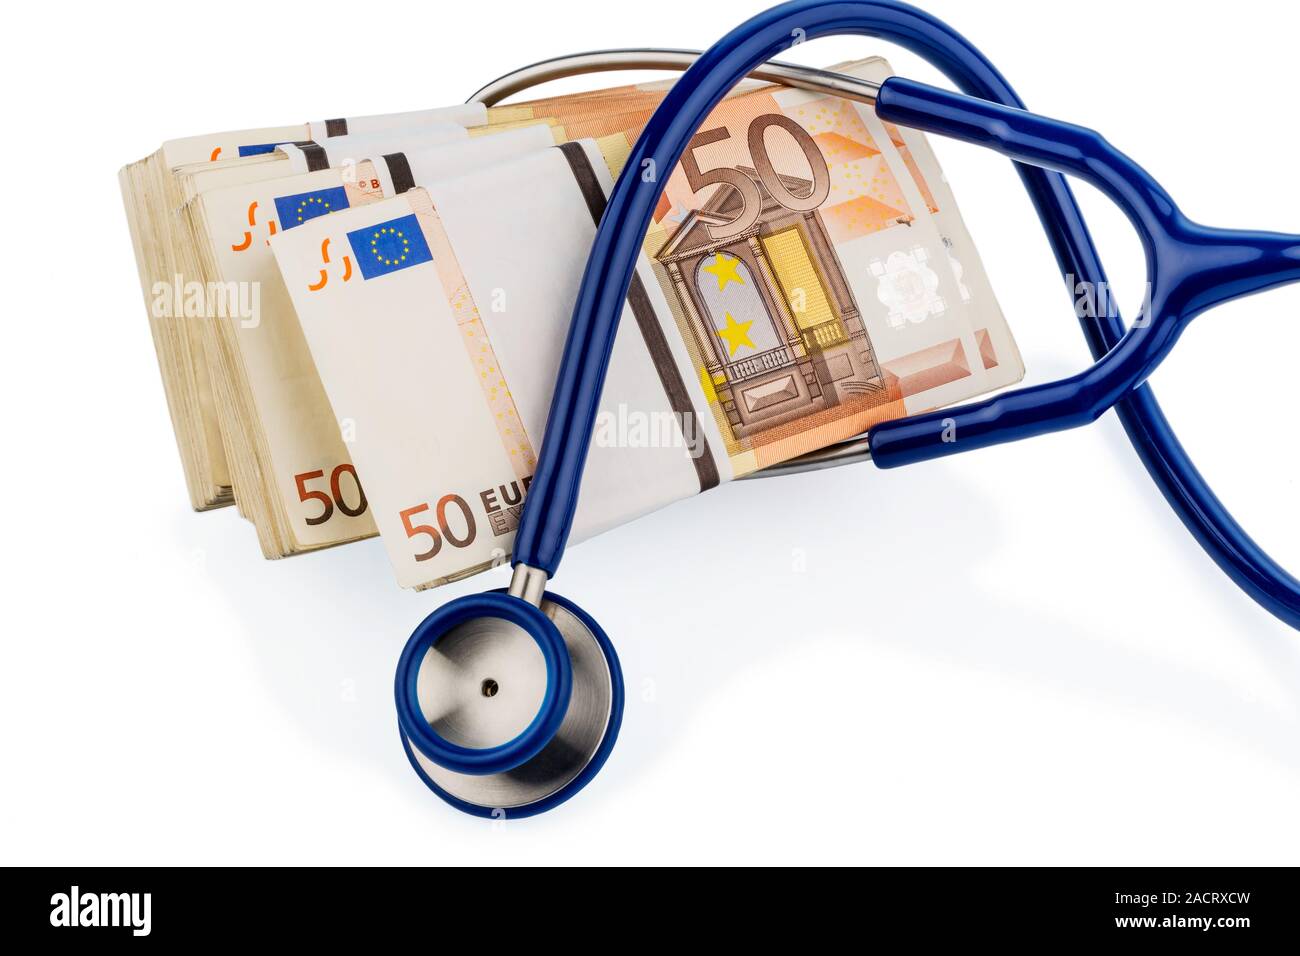 Stethoscope and euro banknotes, Stock Photo